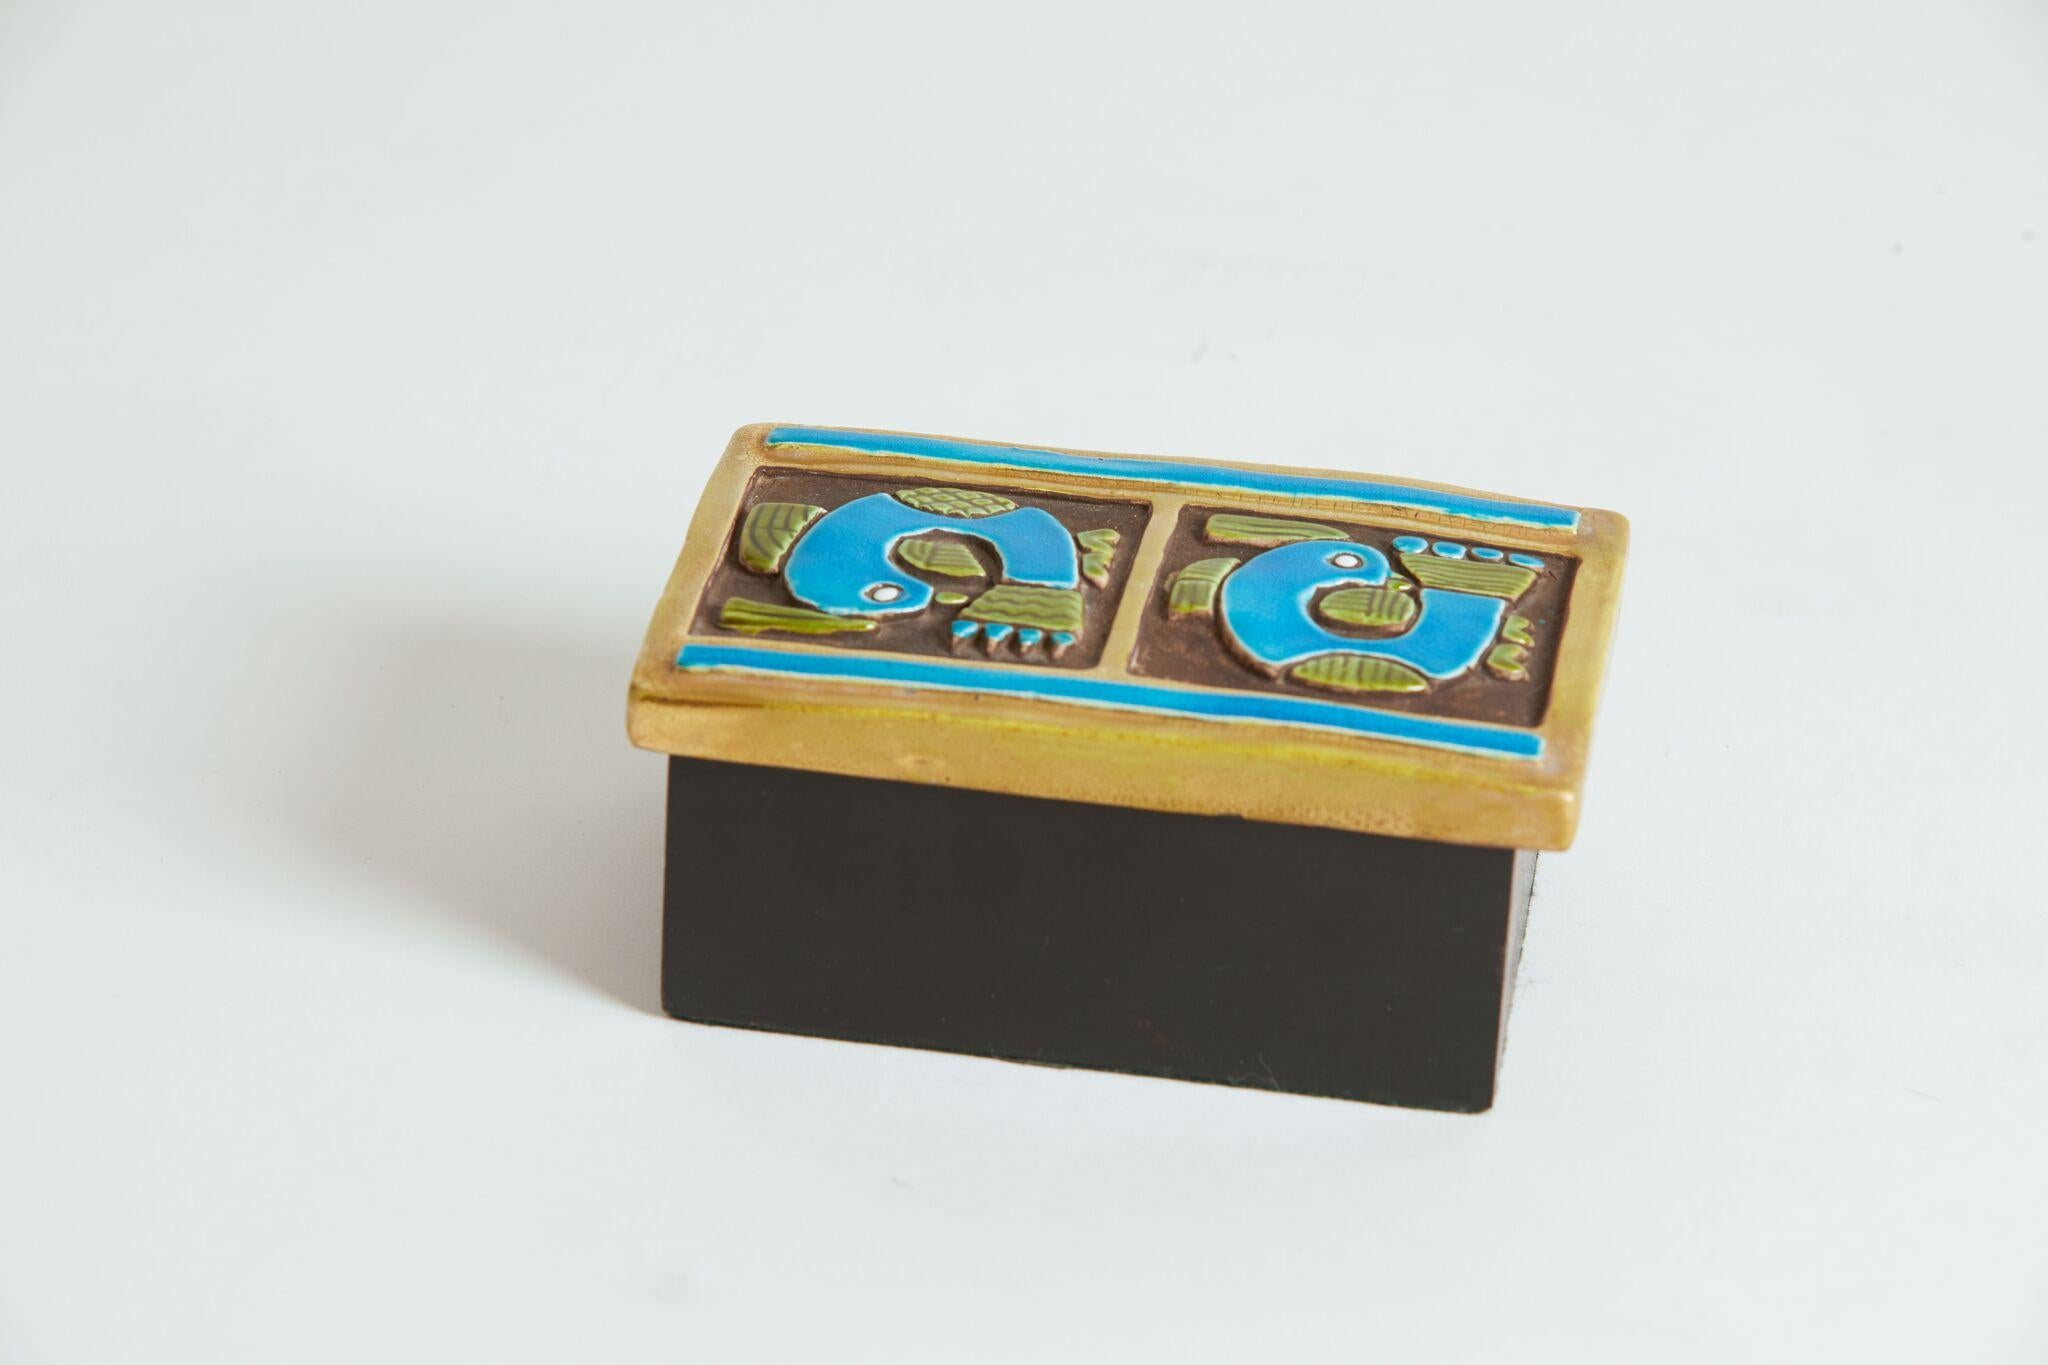 1970s France Francois lembo box with blue bird motif small scale.